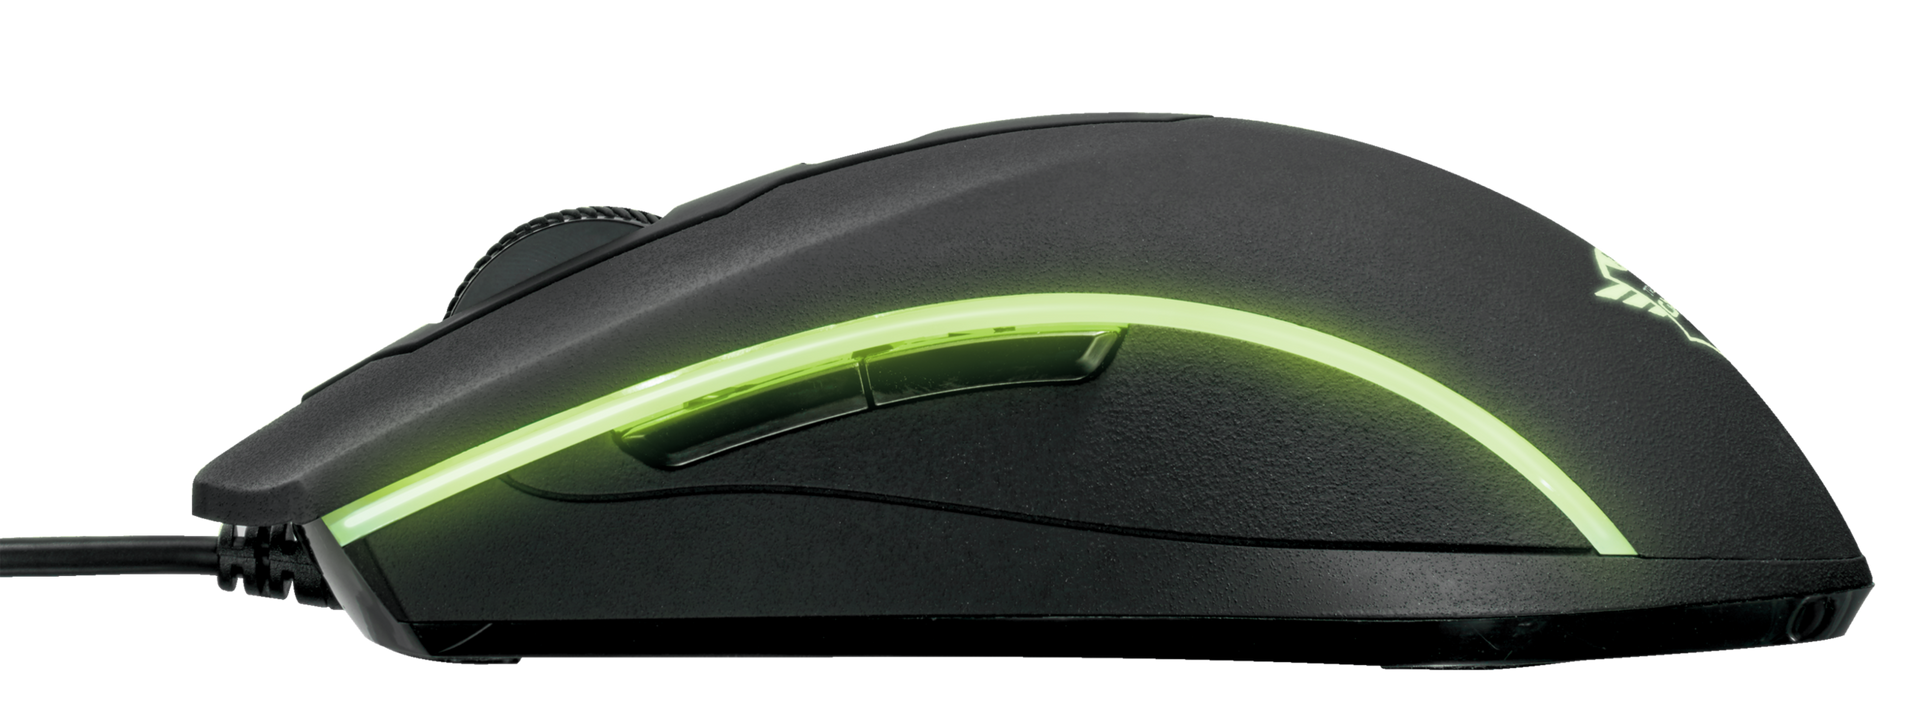 GXT 177 Rivan RGB Gaming Mouse-Side